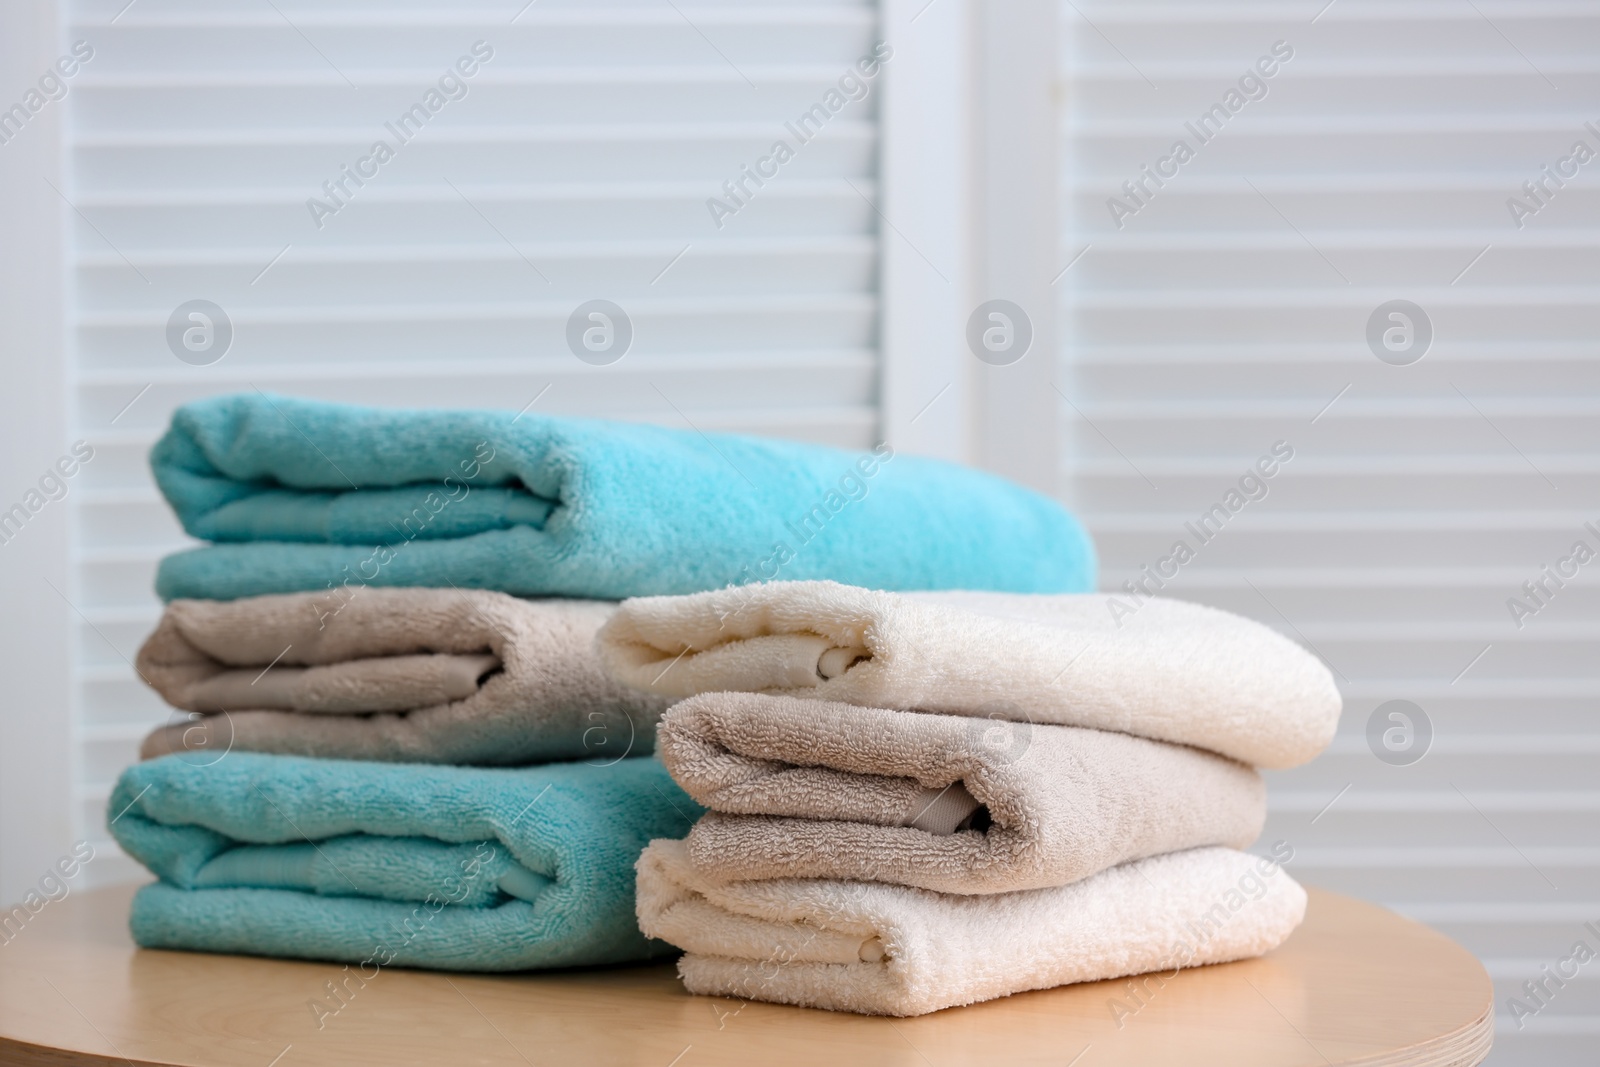 Photo of Stacks of clean towels on table indoors